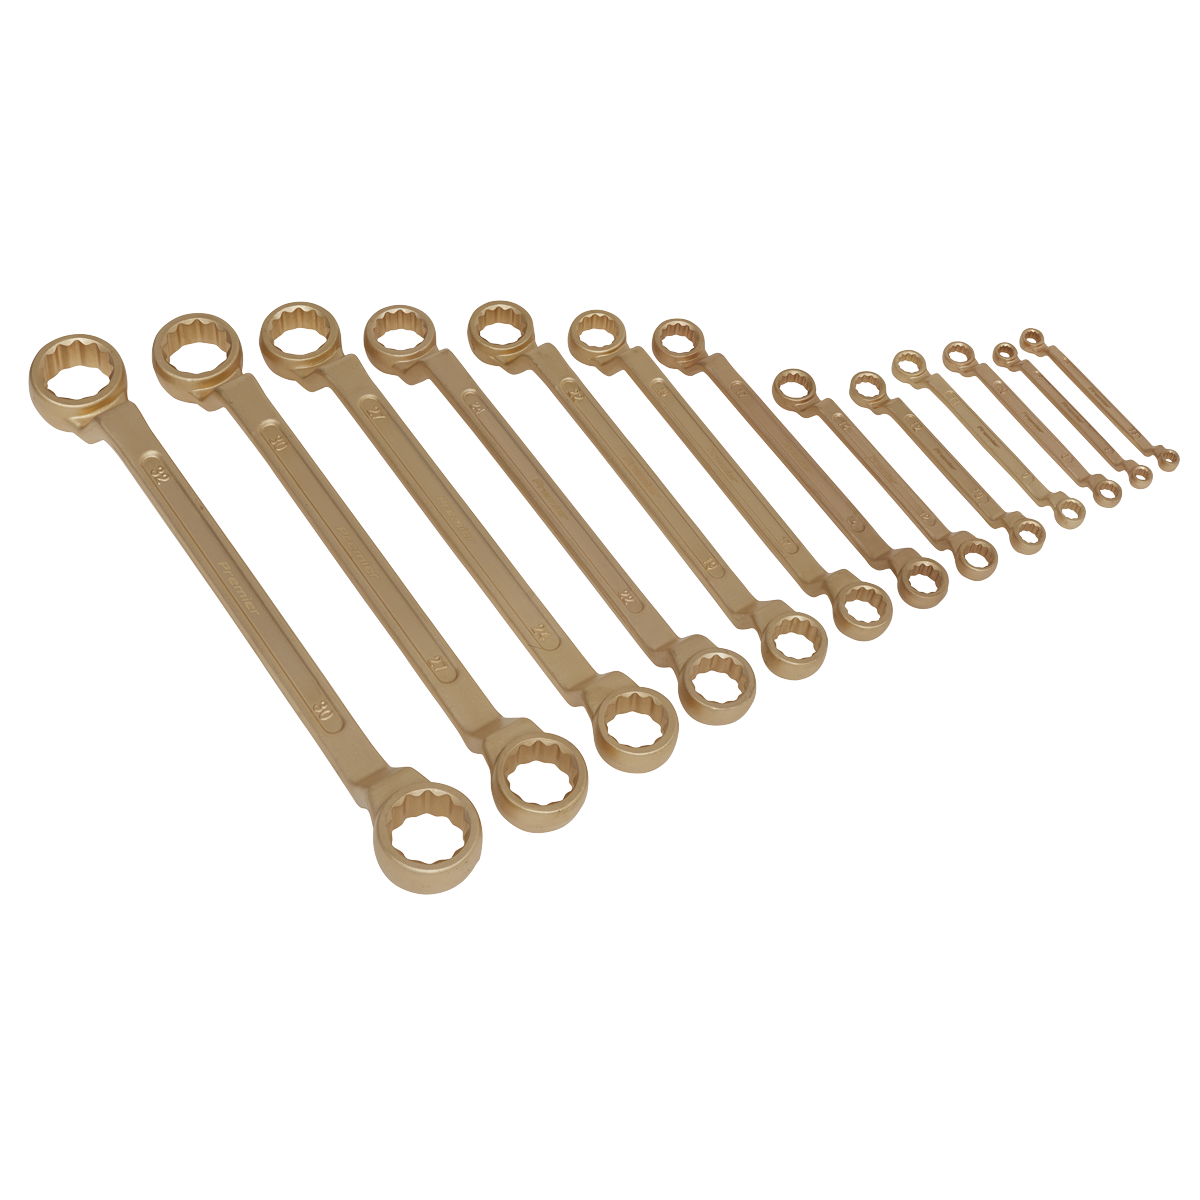 Double End Ring Spanner Set 13pc 5.5-32mm - Non-Sparking - NS016 - Farming Parts